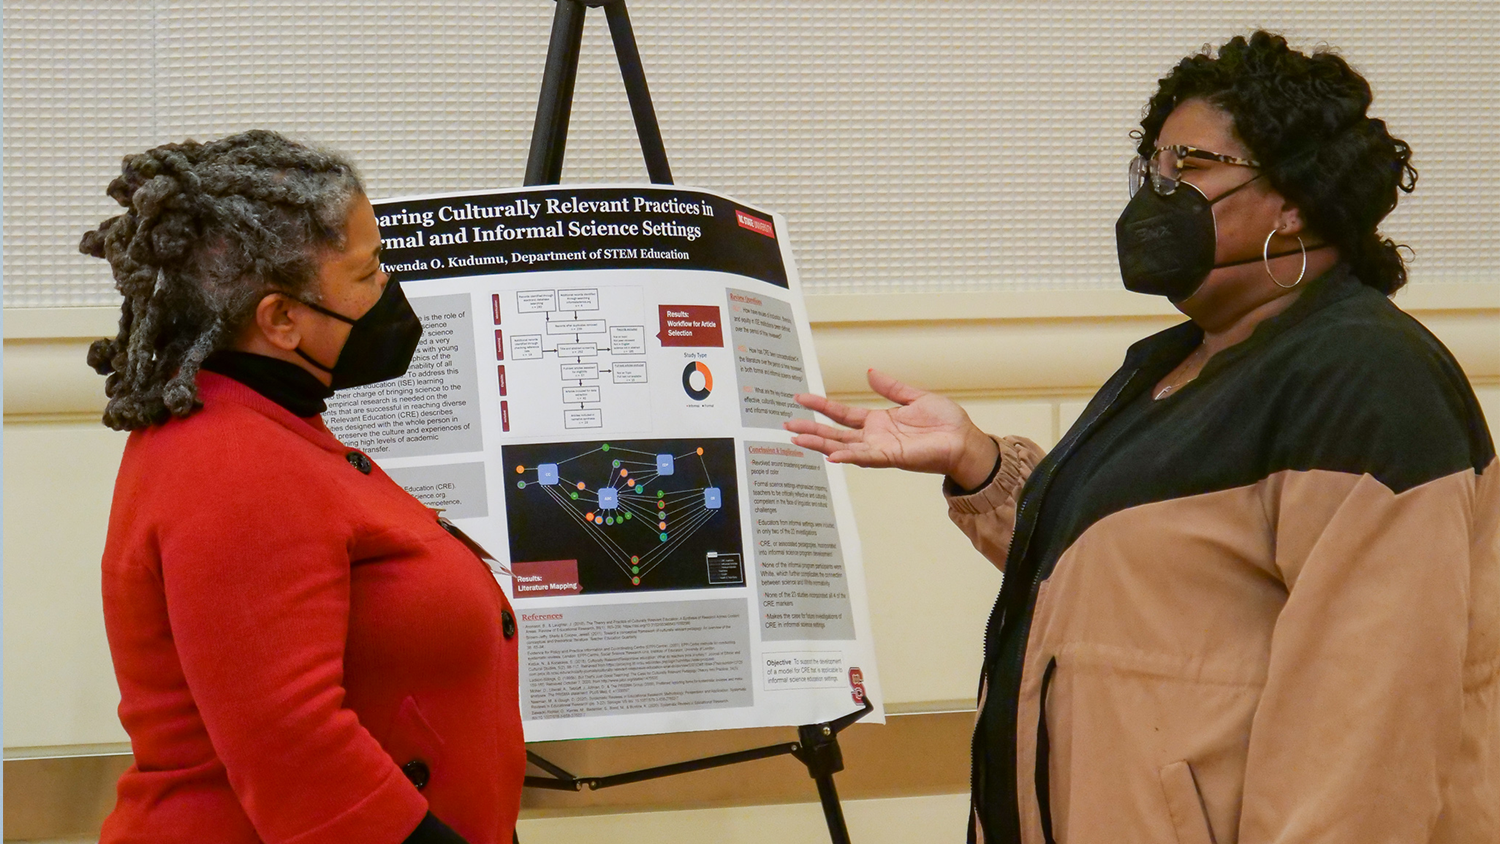 NC State College of Education doctoral student Mwenda Kudumu at the Equity Research Symposium